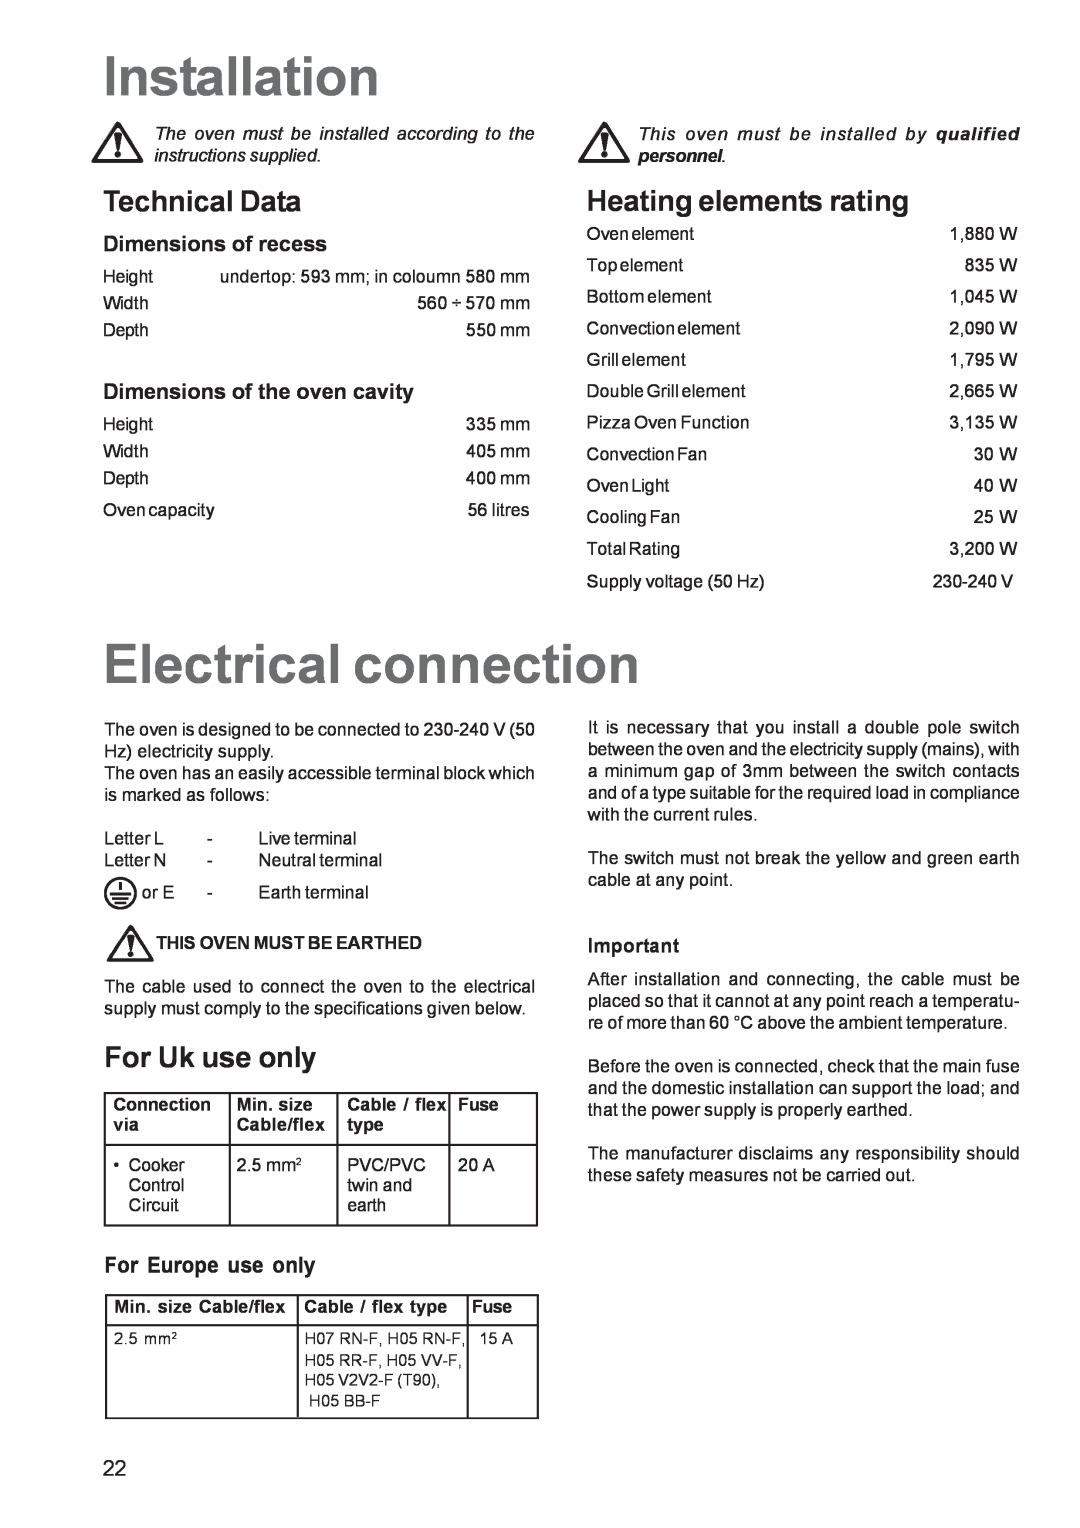 Zanussi ZPB 1260 Installation, Electrical connection, Technical Data, Heating elements rating, For Uk use only, Connection 